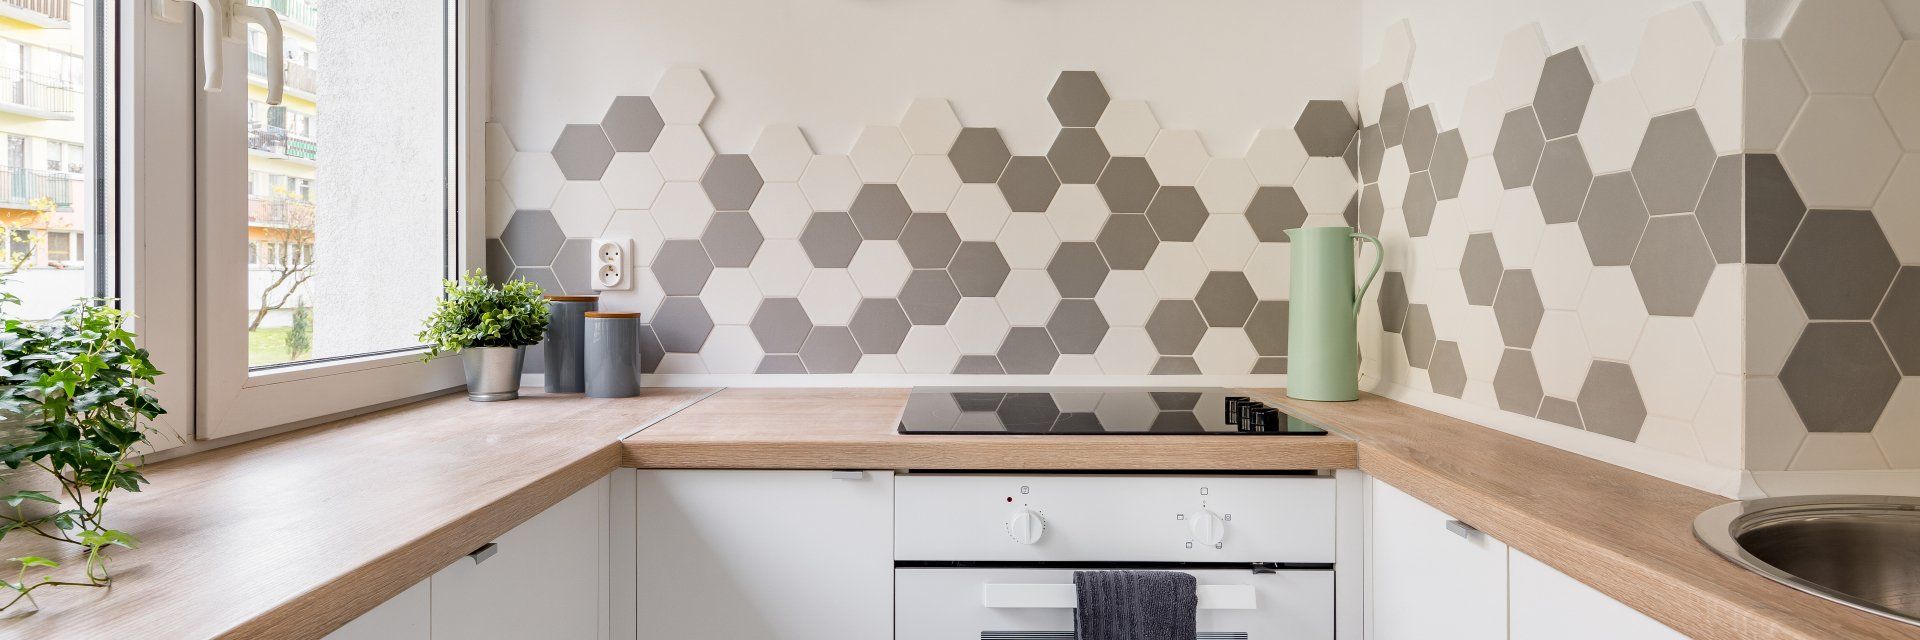 Panorama of kitchen in scandinavian style with white cabinets, wooden countertop and hexagonal wall tiles